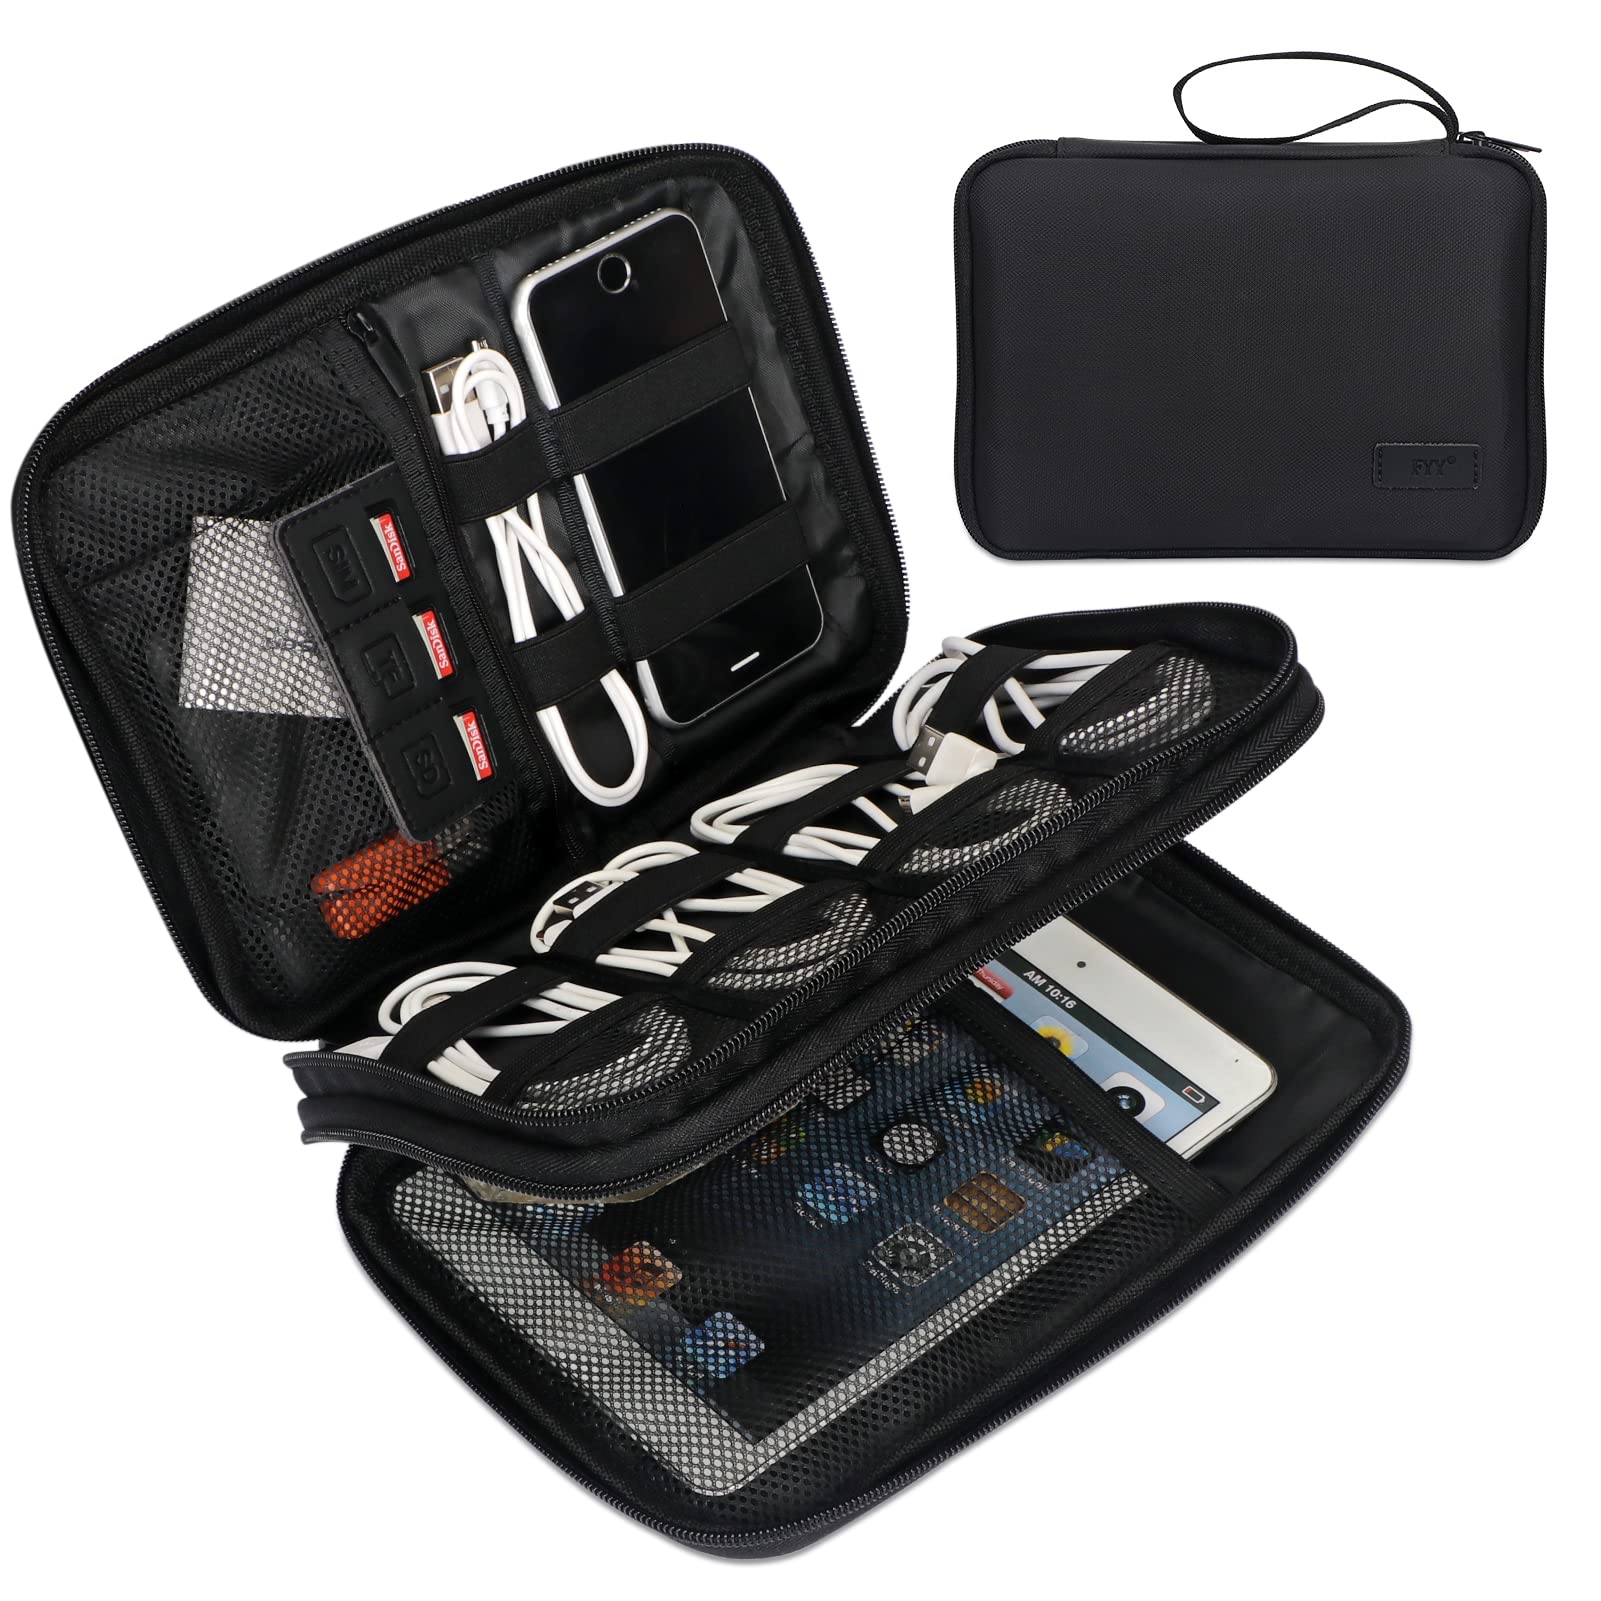 FYY Electronic Organizer, Travel Cable Organizer Bag Pouch Electronic Accessories Carry Case Portable Waterproof Double Layers All-in-One Storage Bag for Cable, Cord, Charger, Phone, Hard Drive,-Black